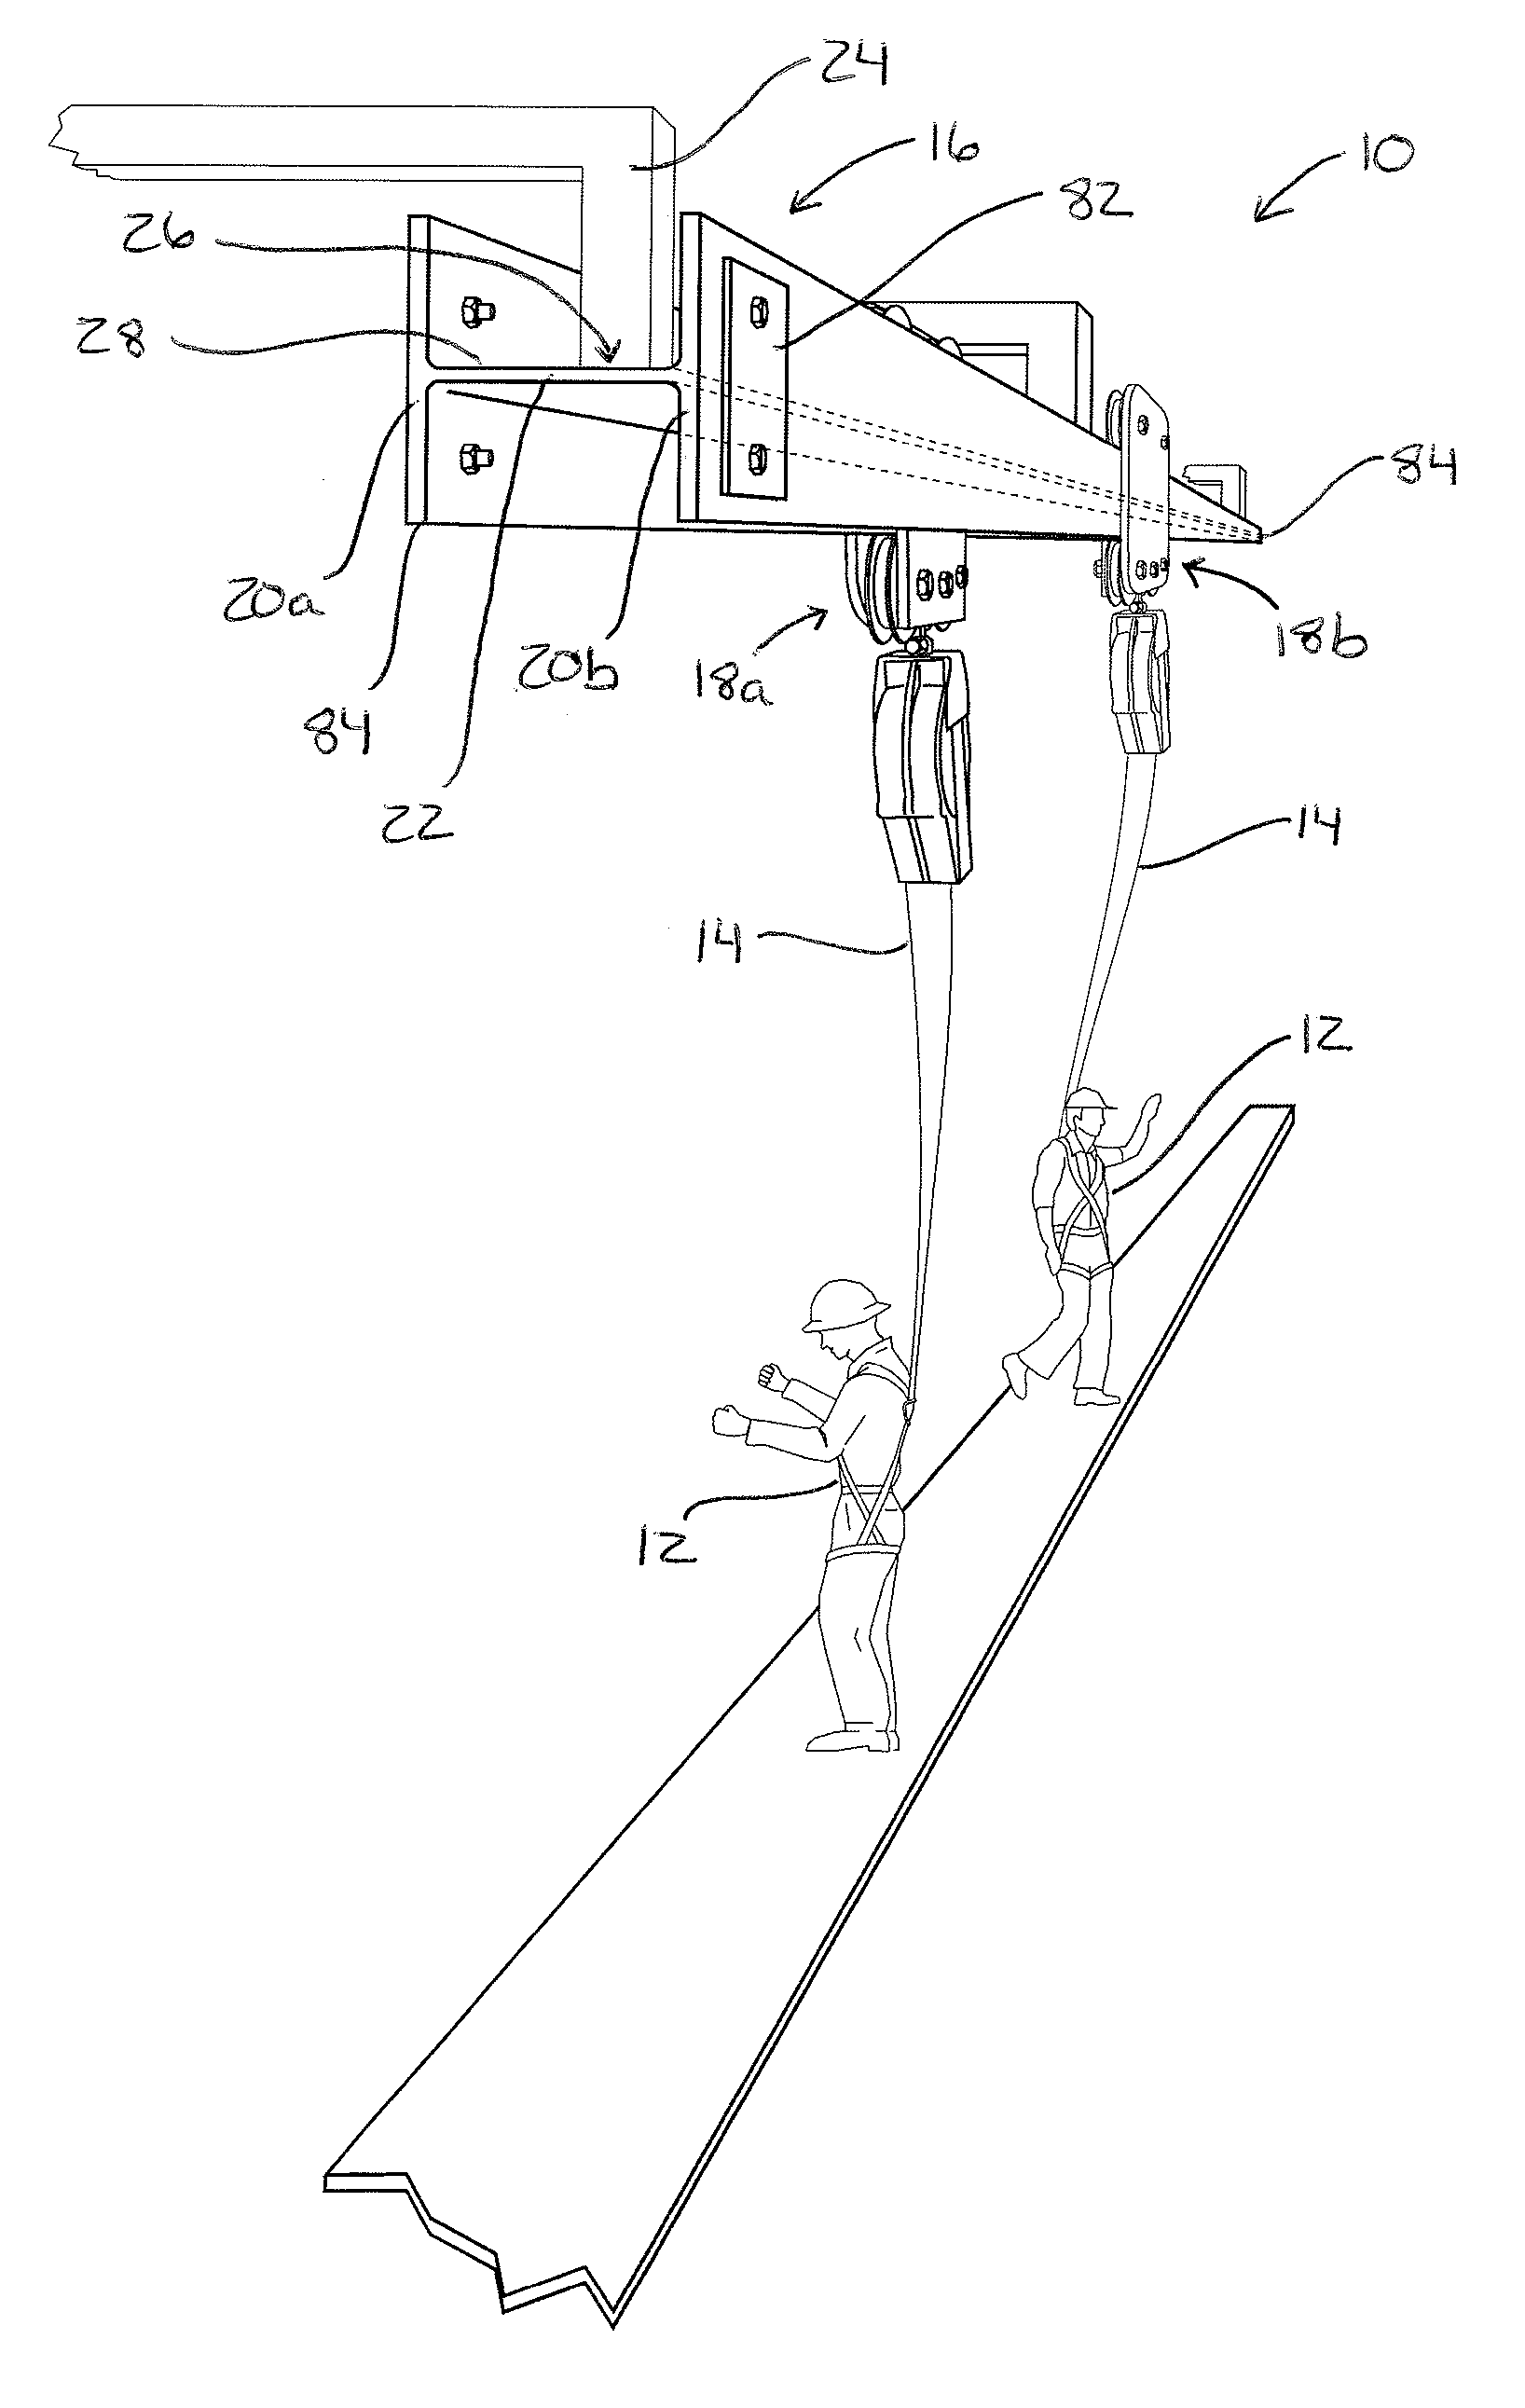 Rigid rail fall protection apparatus having bypassable moveable anchorages